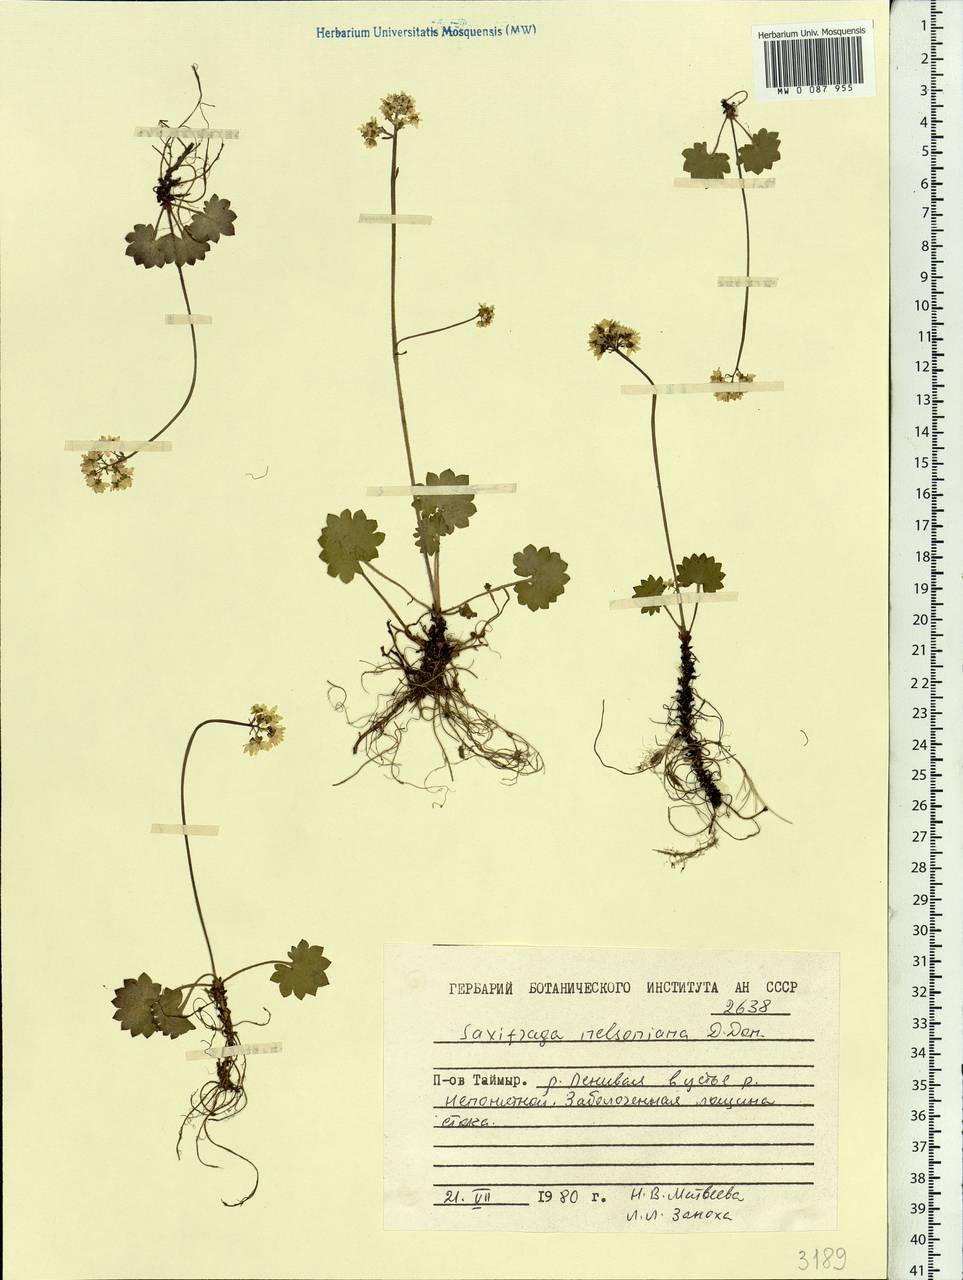 Micranthes nelsoniana subsp. nelsoniana, Siberia, Central Siberia (S3) (Russia)